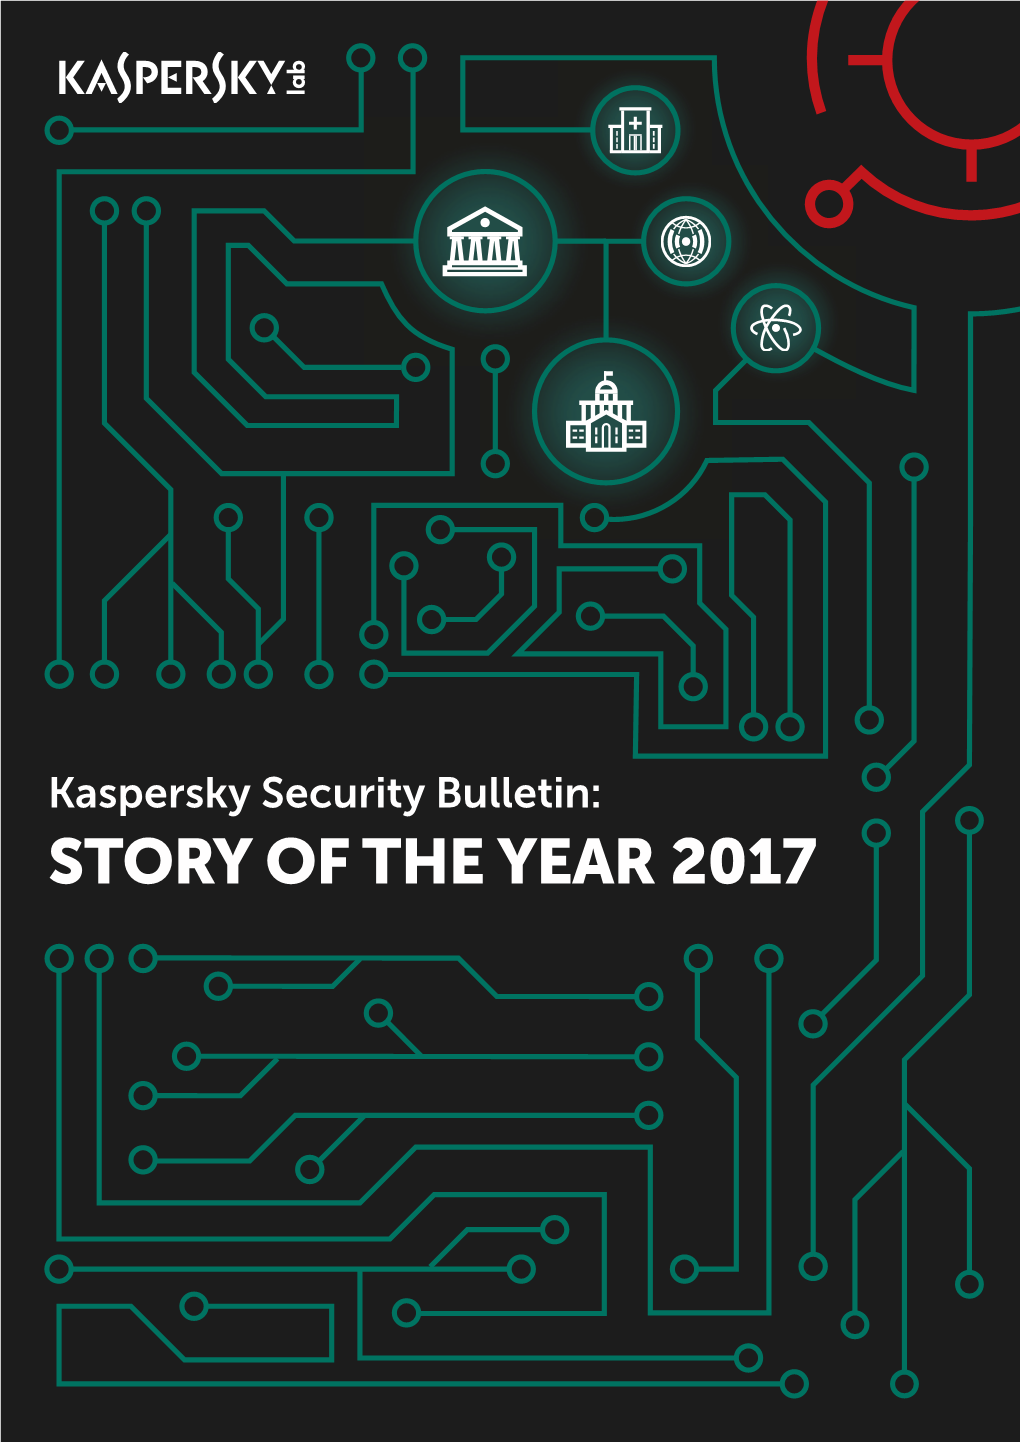 Story of the Year 2017 Kaspersky Security Bulletin: Story of the Year 2017